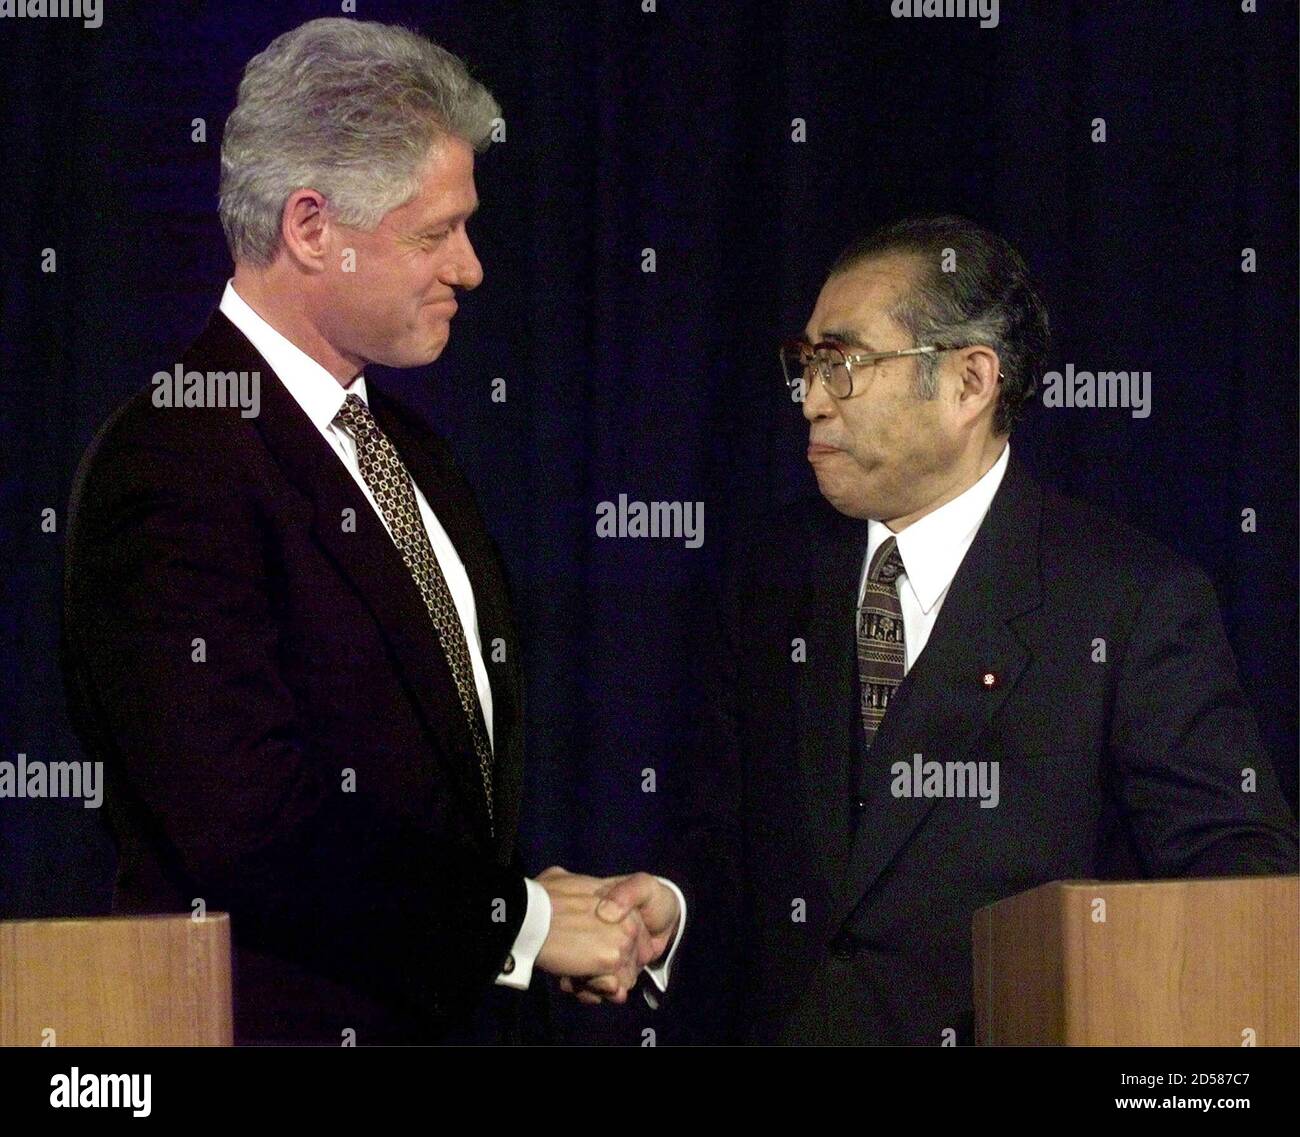 President Clinton and Japanese Prime Minister Keizo Obuchi shake hands  following their joint statement in Tokyo's Akasaka Palace at the end of  Clinton's two-day visit to Japan November 20. They discussed each